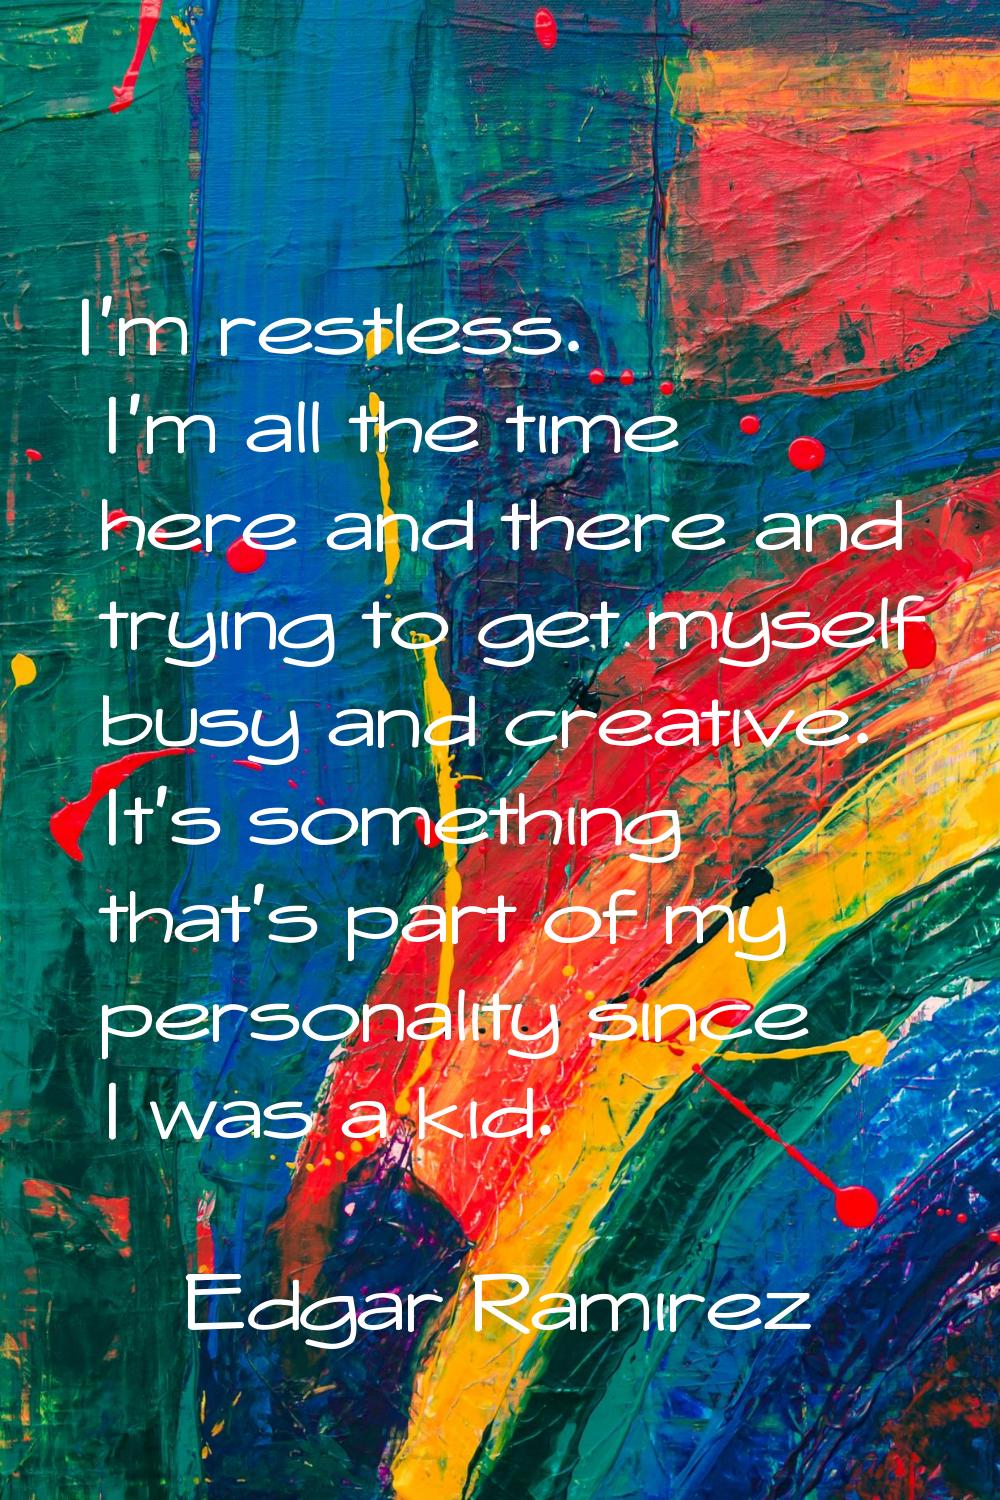 I'm restless. I'm all the time here and there and trying to get myself busy and creative. It's some